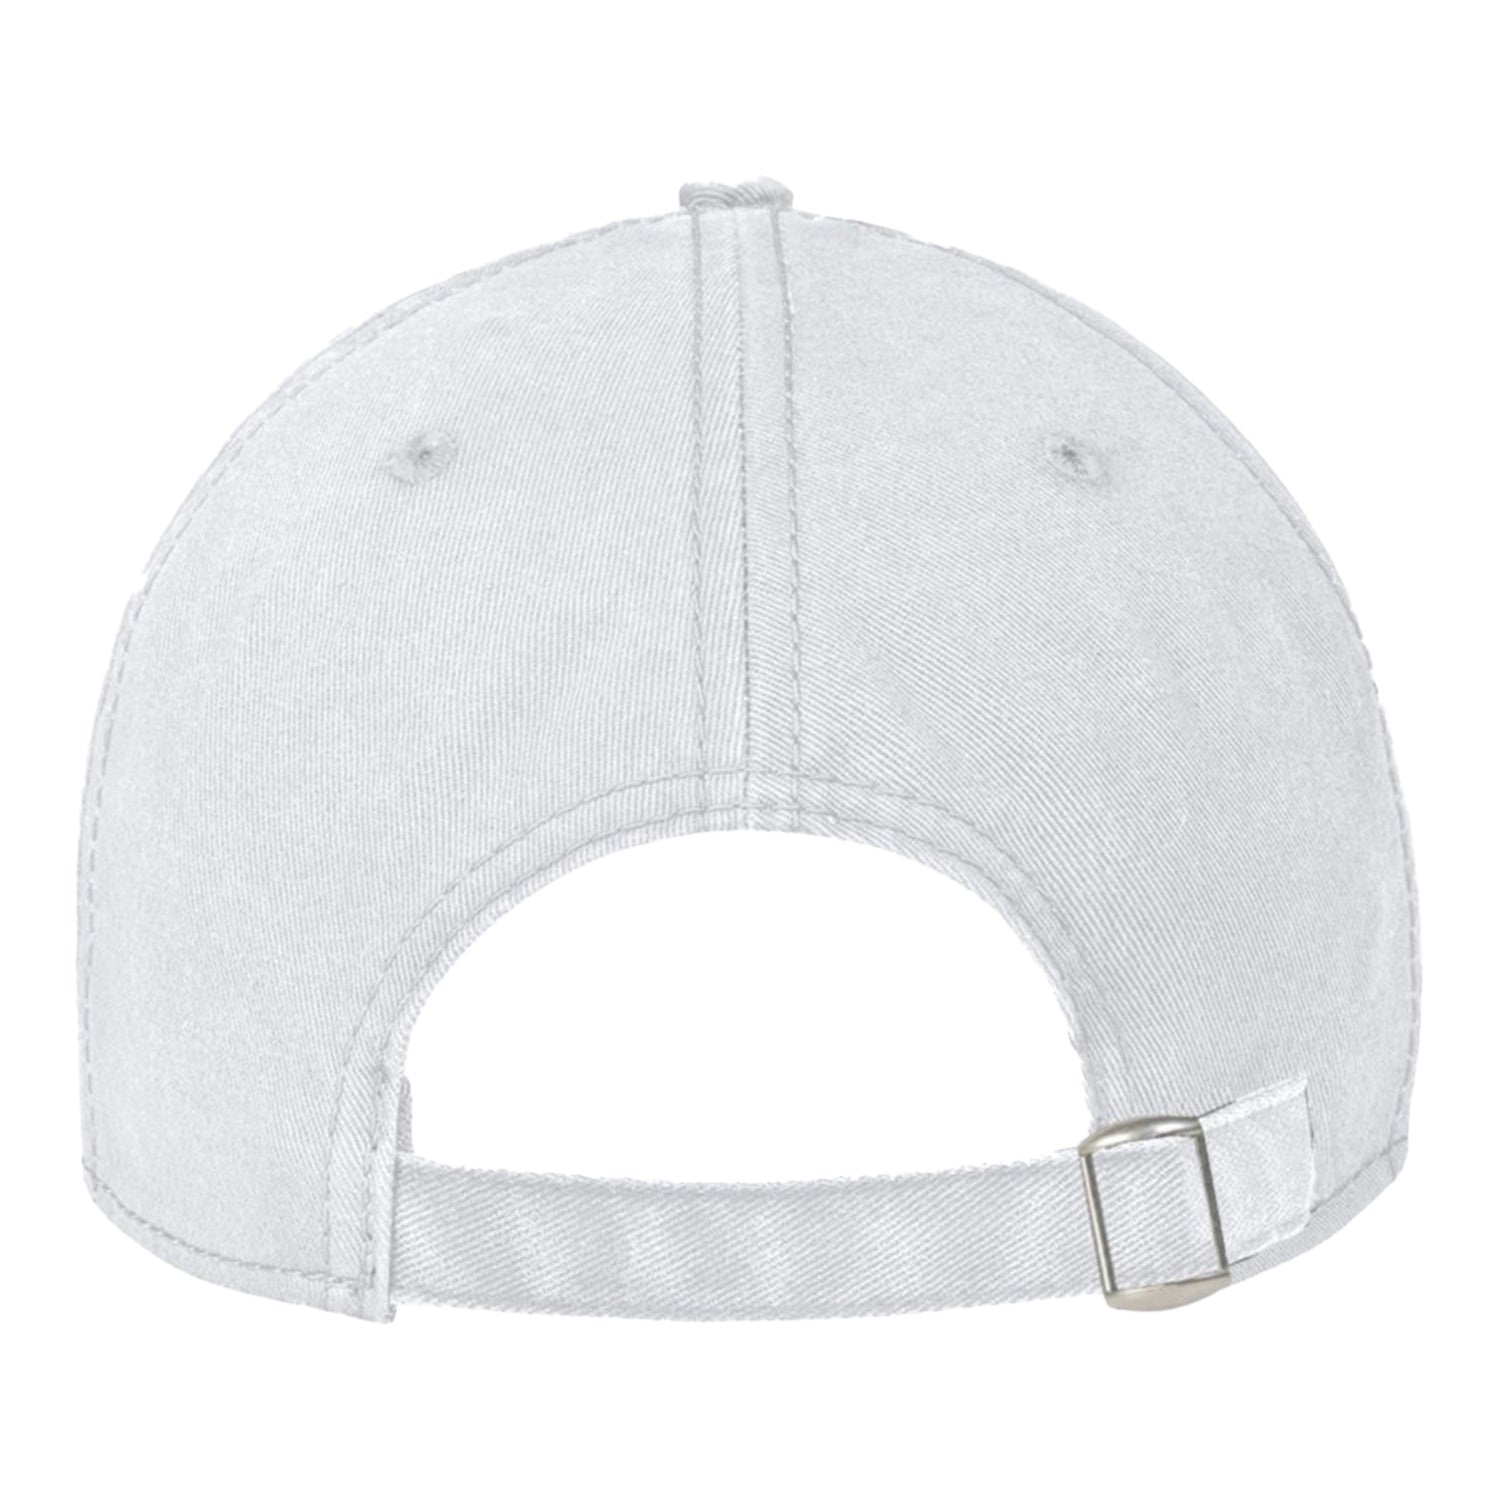 Under Armour Memphis Showboats Garment Washed Hat In White - Back View